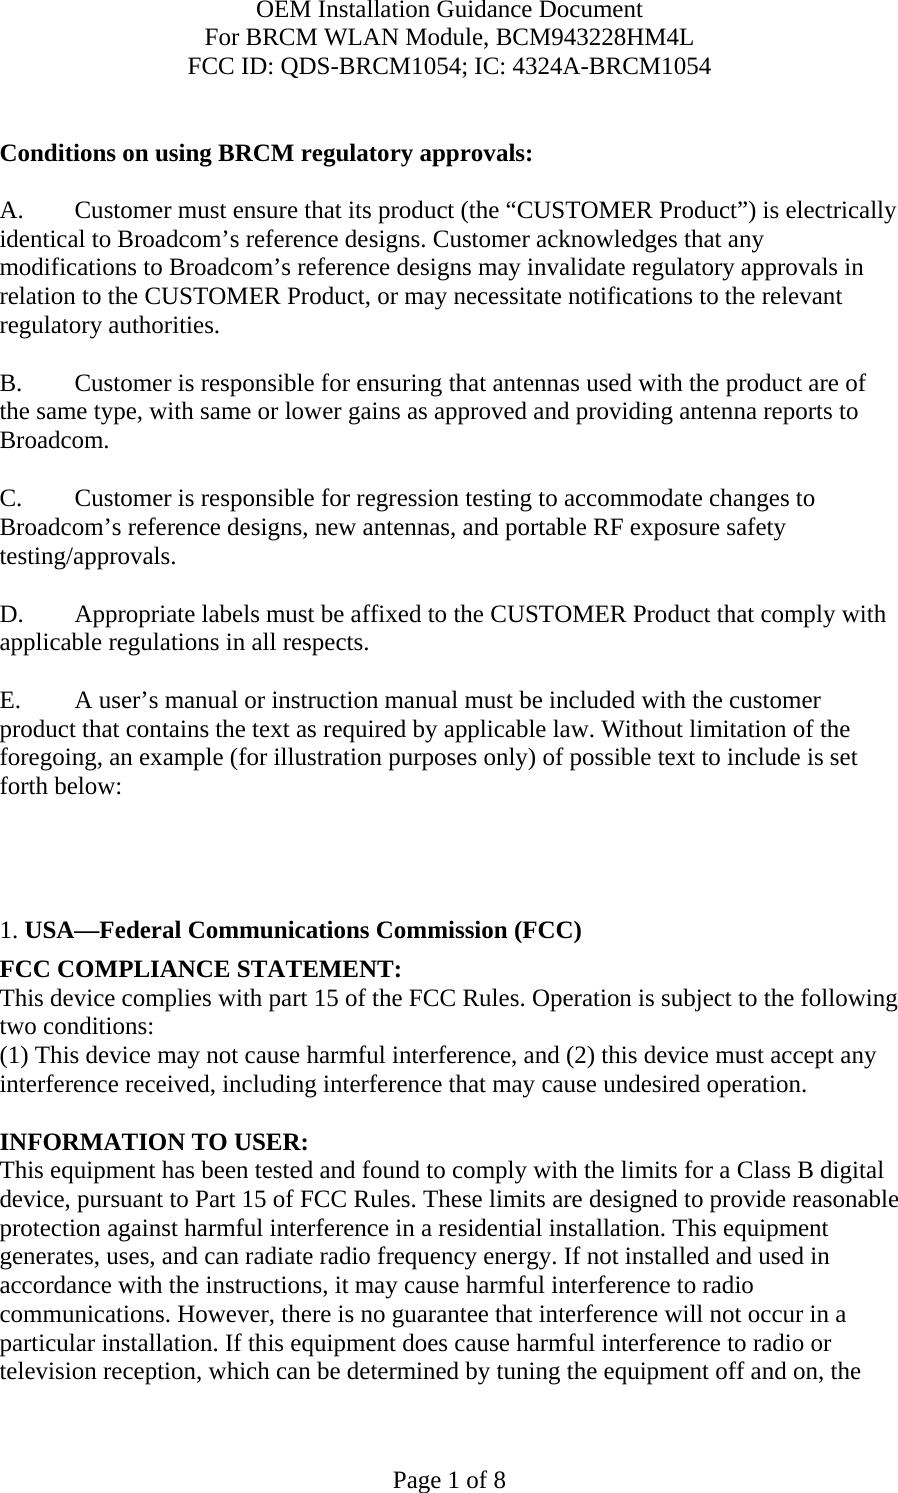 OEM Installation Guidance Document For BRCM WLAN Module, BCM943228HM4L FCC ID: QDS-BRCM1054; IC: 4324A-BRCM1054  Page 1 of 8  Conditions on using BRCM regulatory approvals:   A.  Customer must ensure that its product (the “CUSTOMER Product”) is electrically identical to Broadcom’s reference designs. Customer acknowledges that any modifications to Broadcom’s reference designs may invalidate regulatory approvals in relation to the CUSTOMER Product, or may necessitate notifications to the relevant regulatory authorities.  B.   Customer is responsible for ensuring that antennas used with the product are of the same type, with same or lower gains as approved and providing antenna reports to Broadcom.  C.   Customer is responsible for regression testing to accommodate changes to Broadcom’s reference designs, new antennas, and portable RF exposure safety testing/approvals.  D.  Appropriate labels must be affixed to the CUSTOMER Product that comply with applicable regulations in all respects.    E.  A user’s manual or instruction manual must be included with the customer product that contains the text as required by applicable law. Without limitation of the foregoing, an example (for illustration purposes only) of possible text to include is set forth below:       1. USA—Federal Communications Commission (FCC) FCC COMPLIANCE STATEMENT: This device complies with part 15 of the FCC Rules. Operation is subject to the following two conditions: (1) This device may not cause harmful interference, and (2) this device must accept any interference received, including interference that may cause undesired operation.  INFORMATION TO USER: This equipment has been tested and found to comply with the limits for a Class B digital device, pursuant to Part 15 of FCC Rules. These limits are designed to provide reasonable protection against harmful interference in a residential installation. This equipment generates, uses, and can radiate radio frequency energy. If not installed and used in accordance with the instructions, it may cause harmful interference to radio communications. However, there is no guarantee that interference will not occur in a particular installation. If this equipment does cause harmful interference to radio or television reception, which can be determined by tuning the equipment off and on, the 